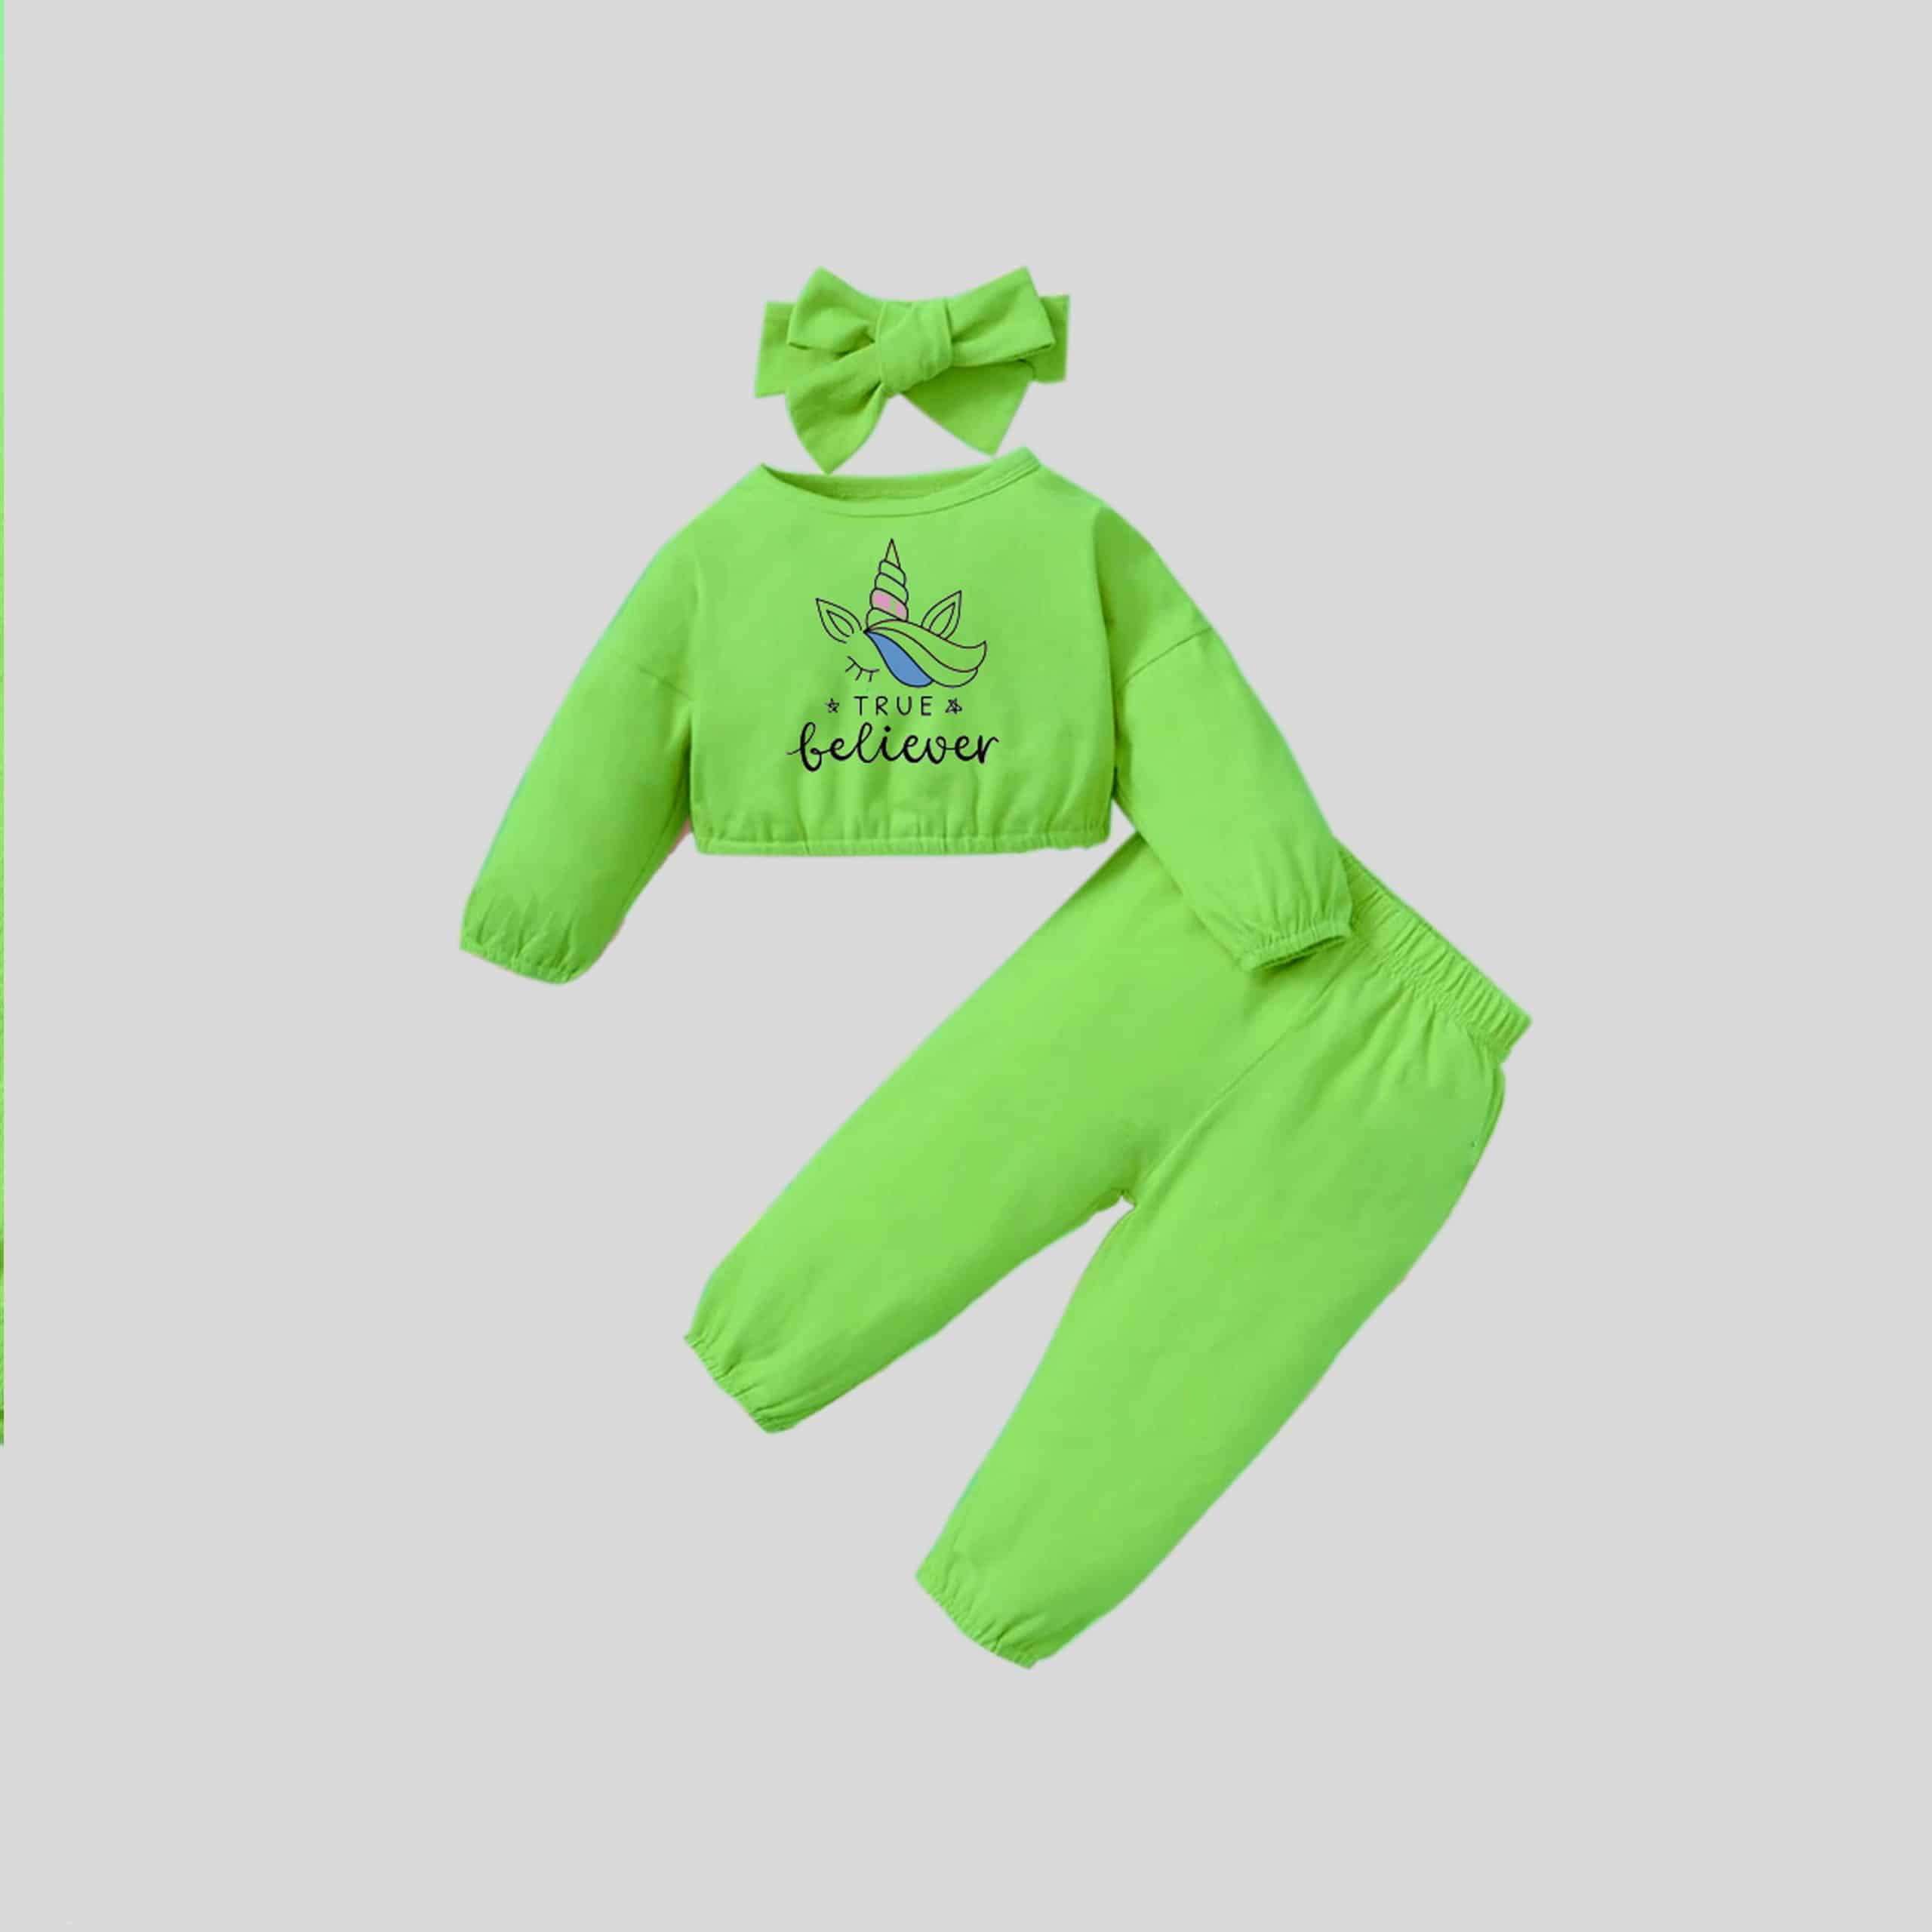 Girls green Sweatshirt with cute print details and Pants set with matching headband-RKFCW306